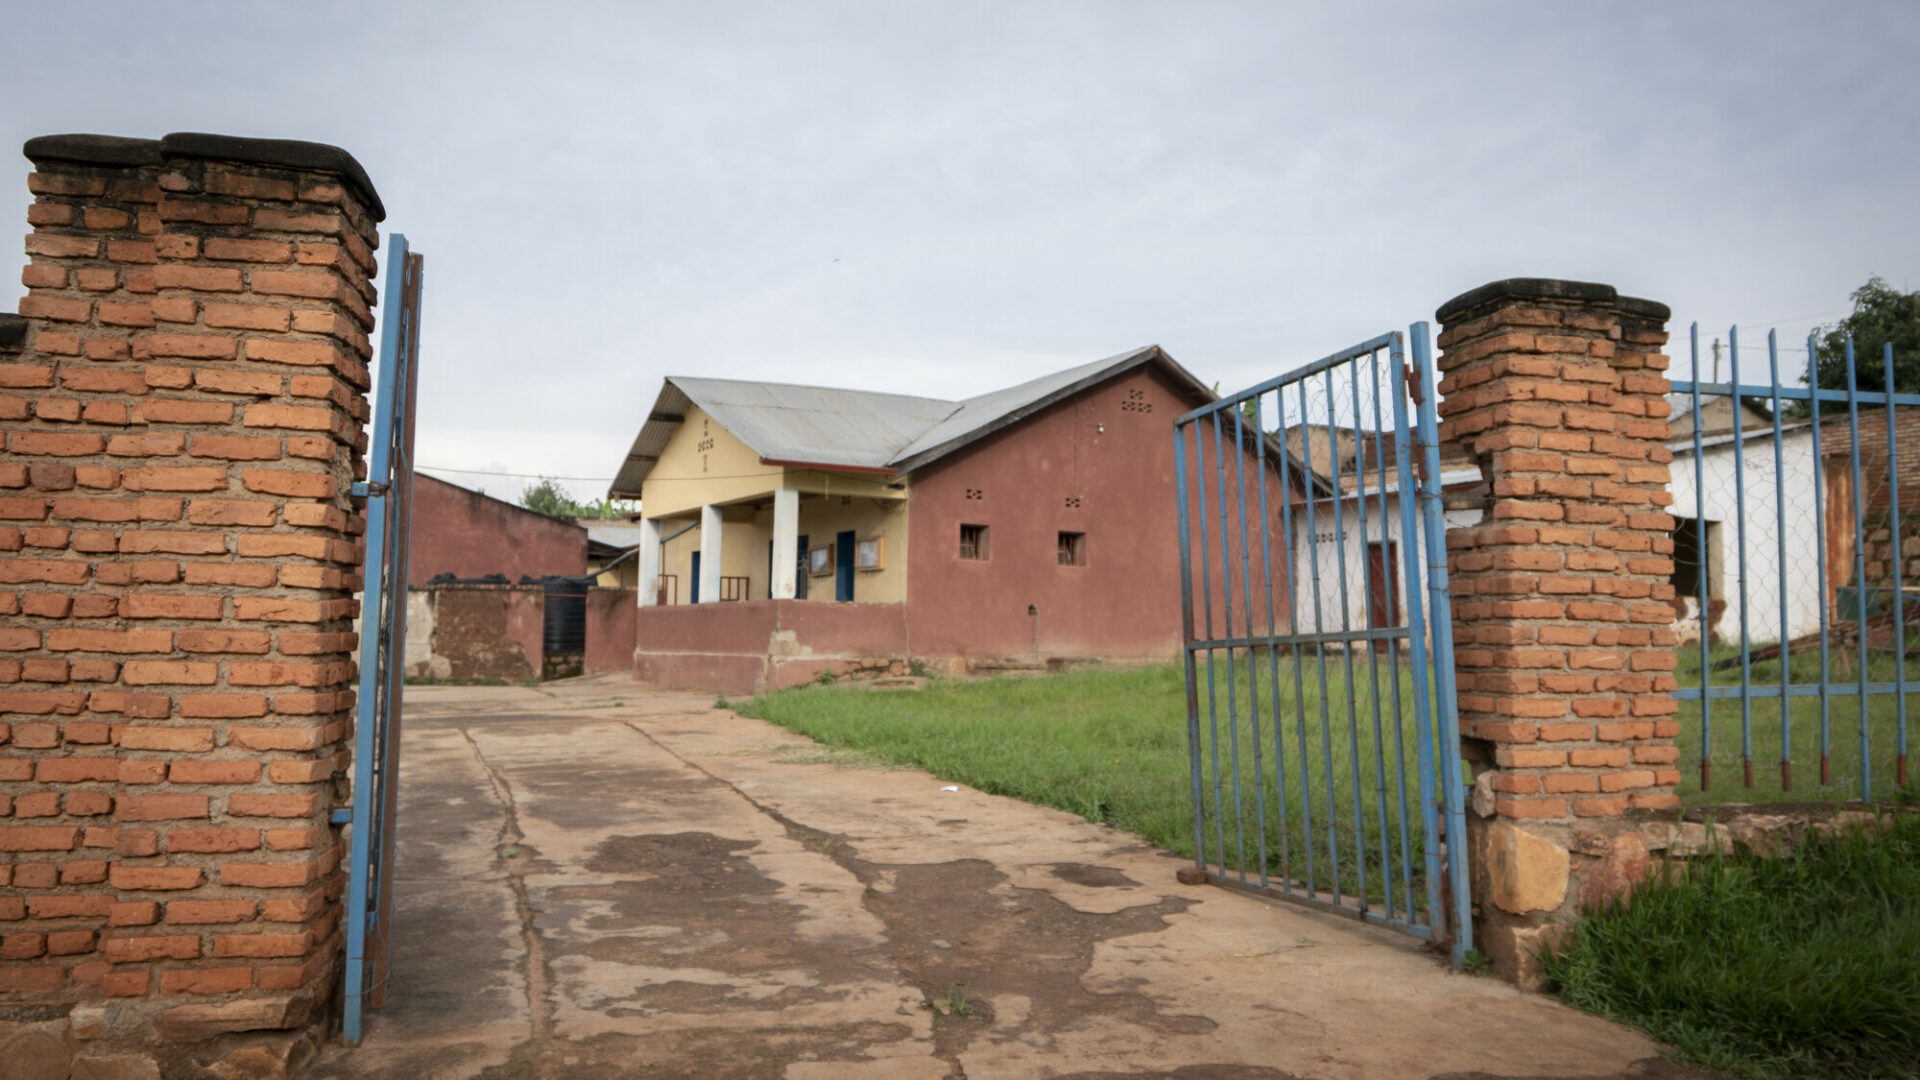 A view of a single storey residential building in Rwanda from outside the gates